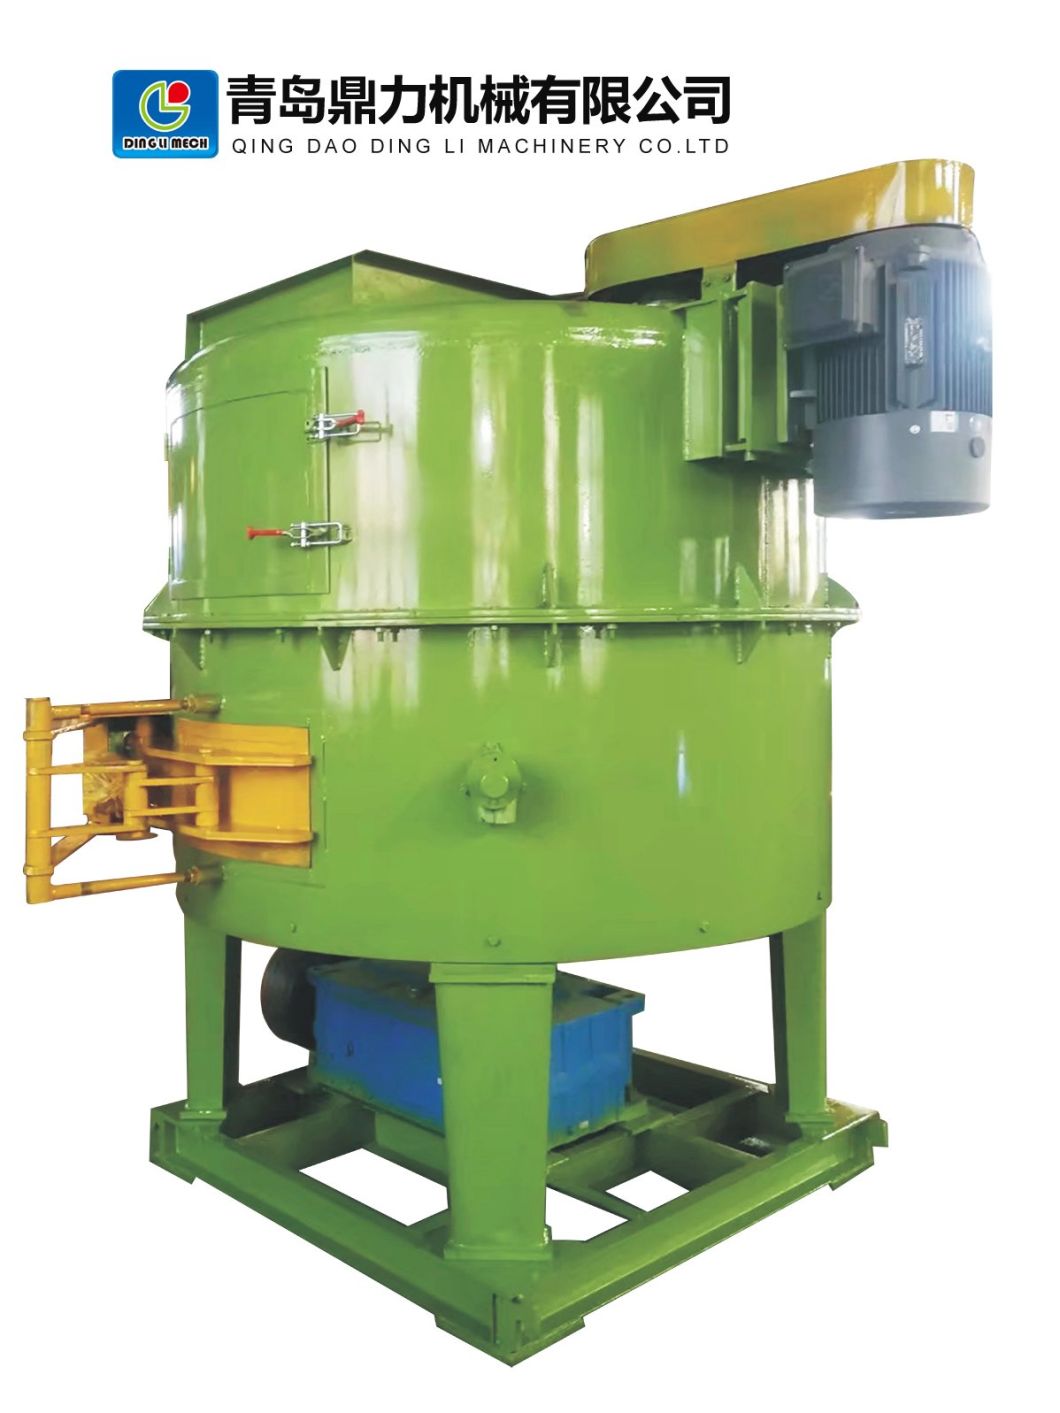 High Efficiency Rotor Sand Mixer for Foundry Machinery